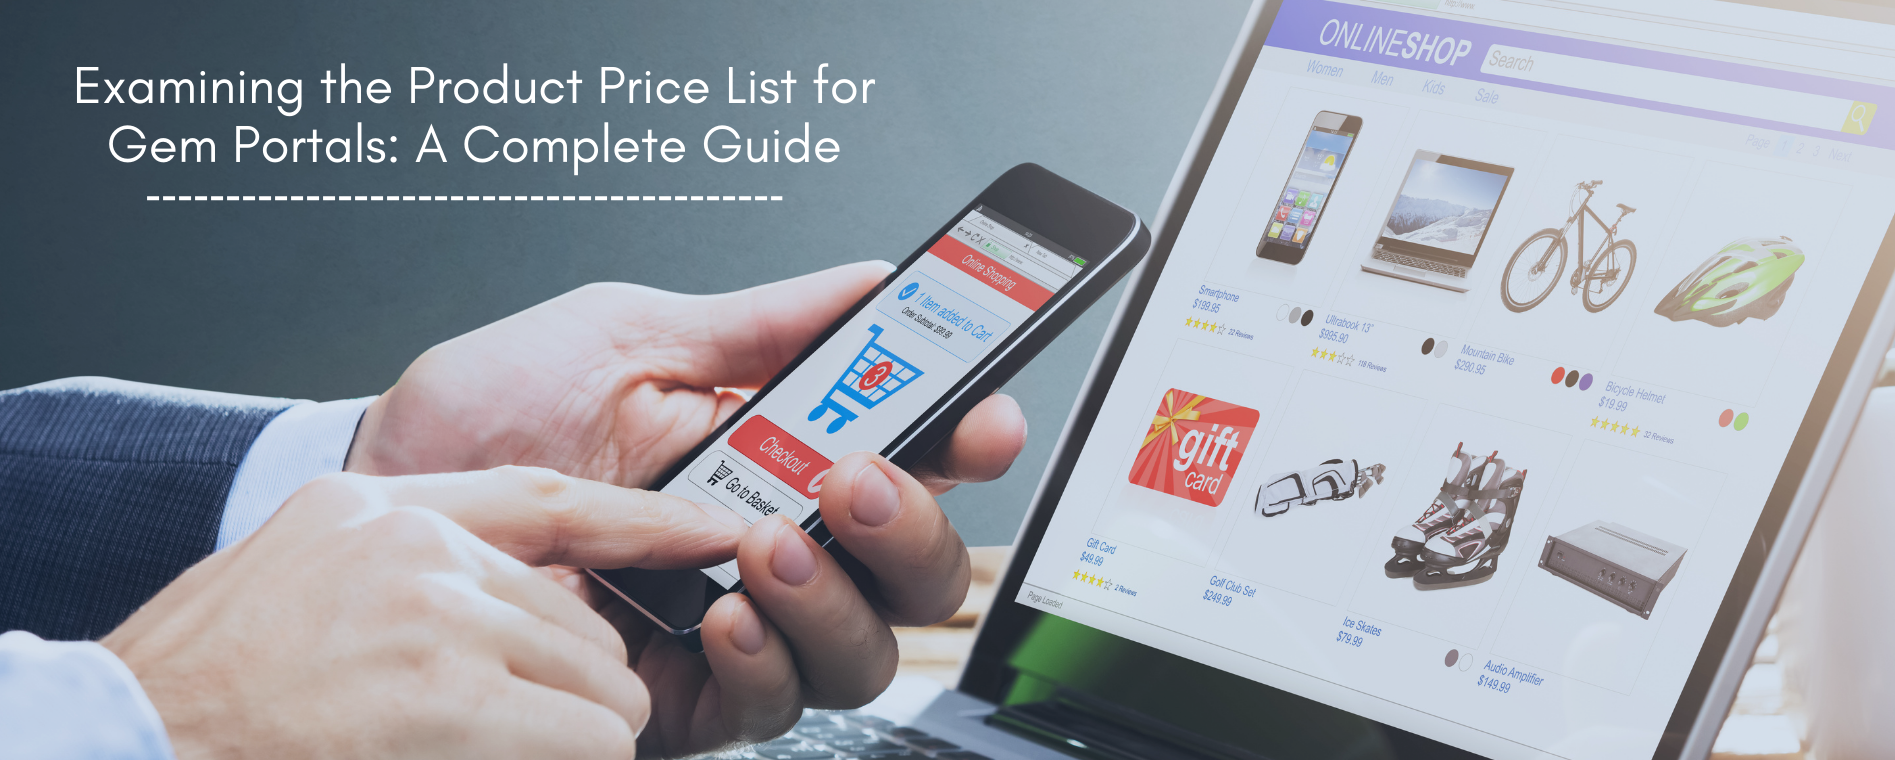 Examining the Product Price List for Gem Portals: A Complete Guide